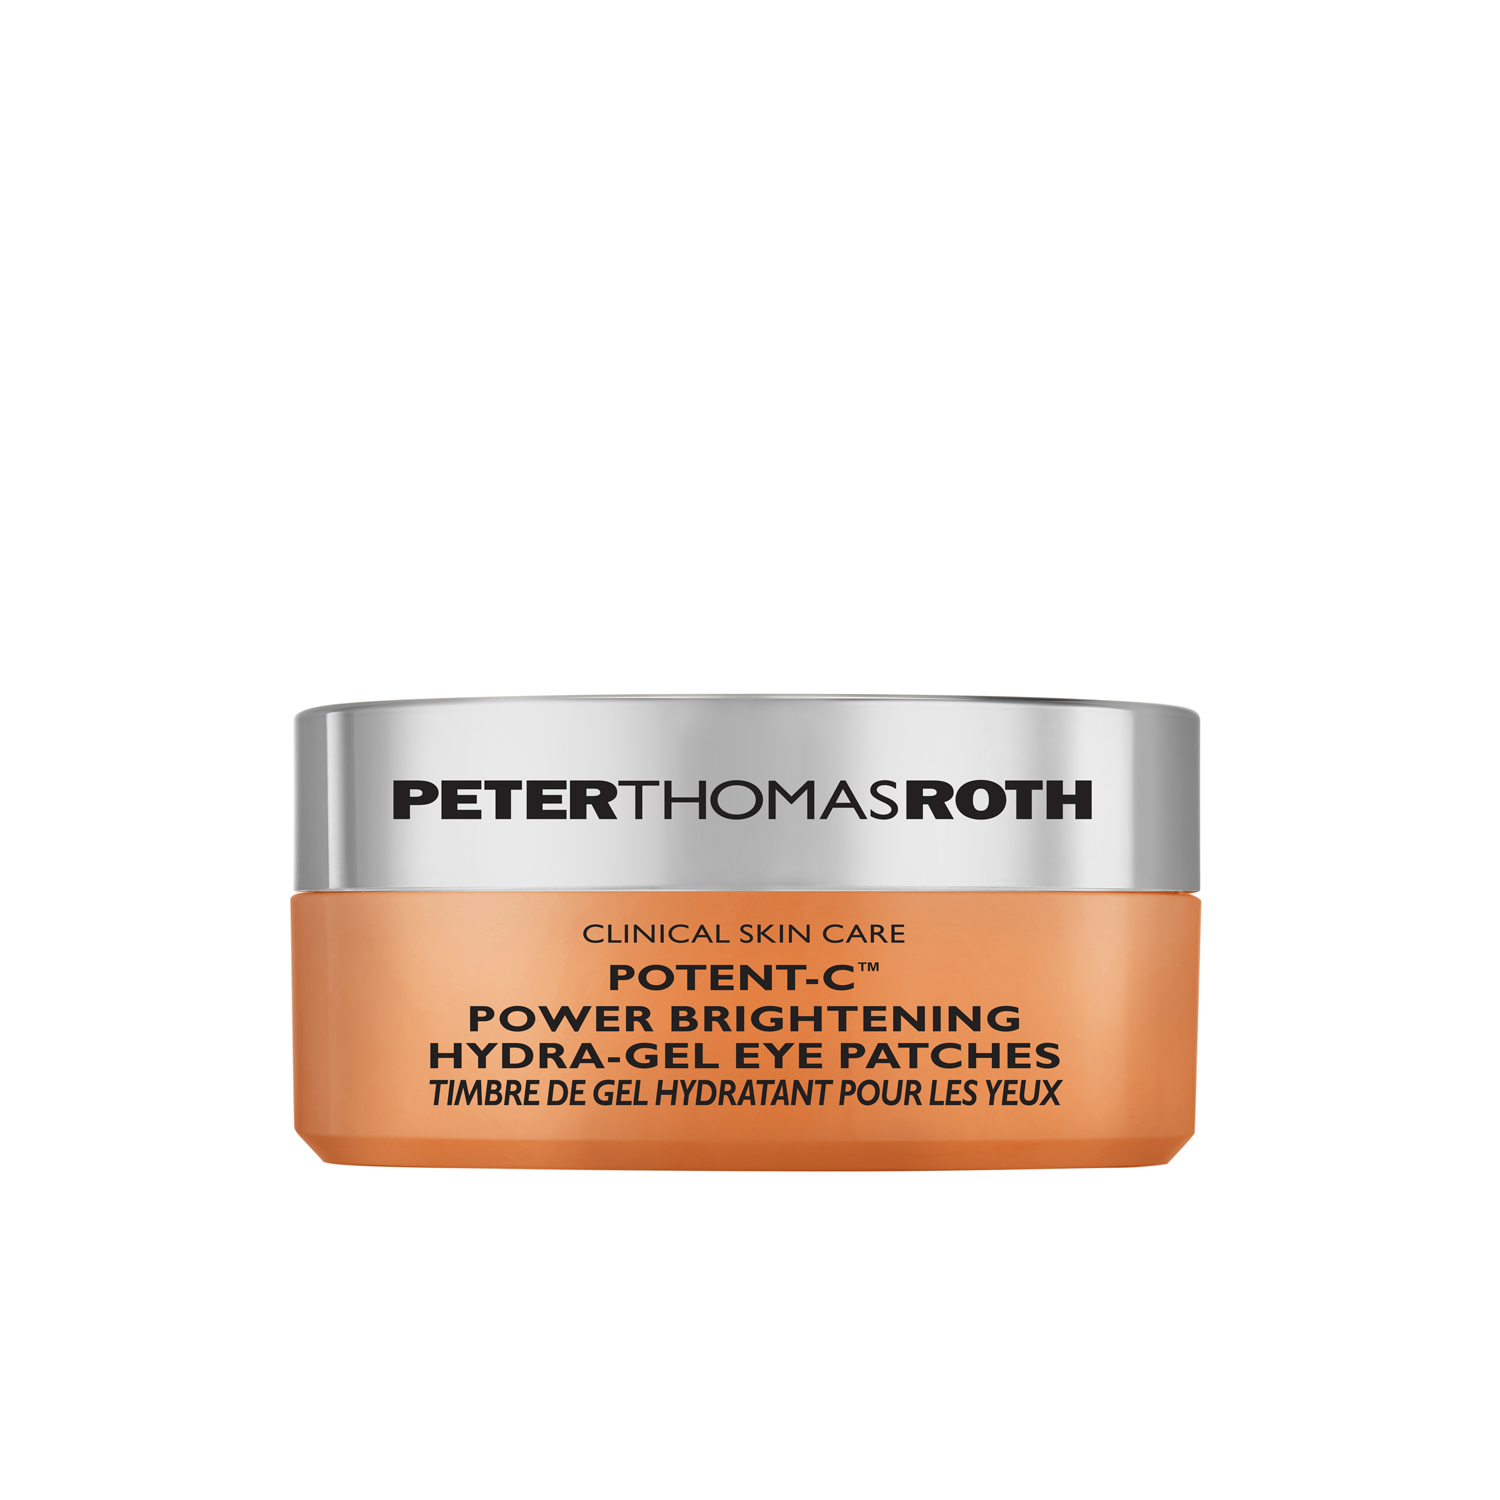 POTENT-C™ POWER BRIGHTENING HYDRA-GEL EYE PATCHES (PARCHES PARA OJOS)